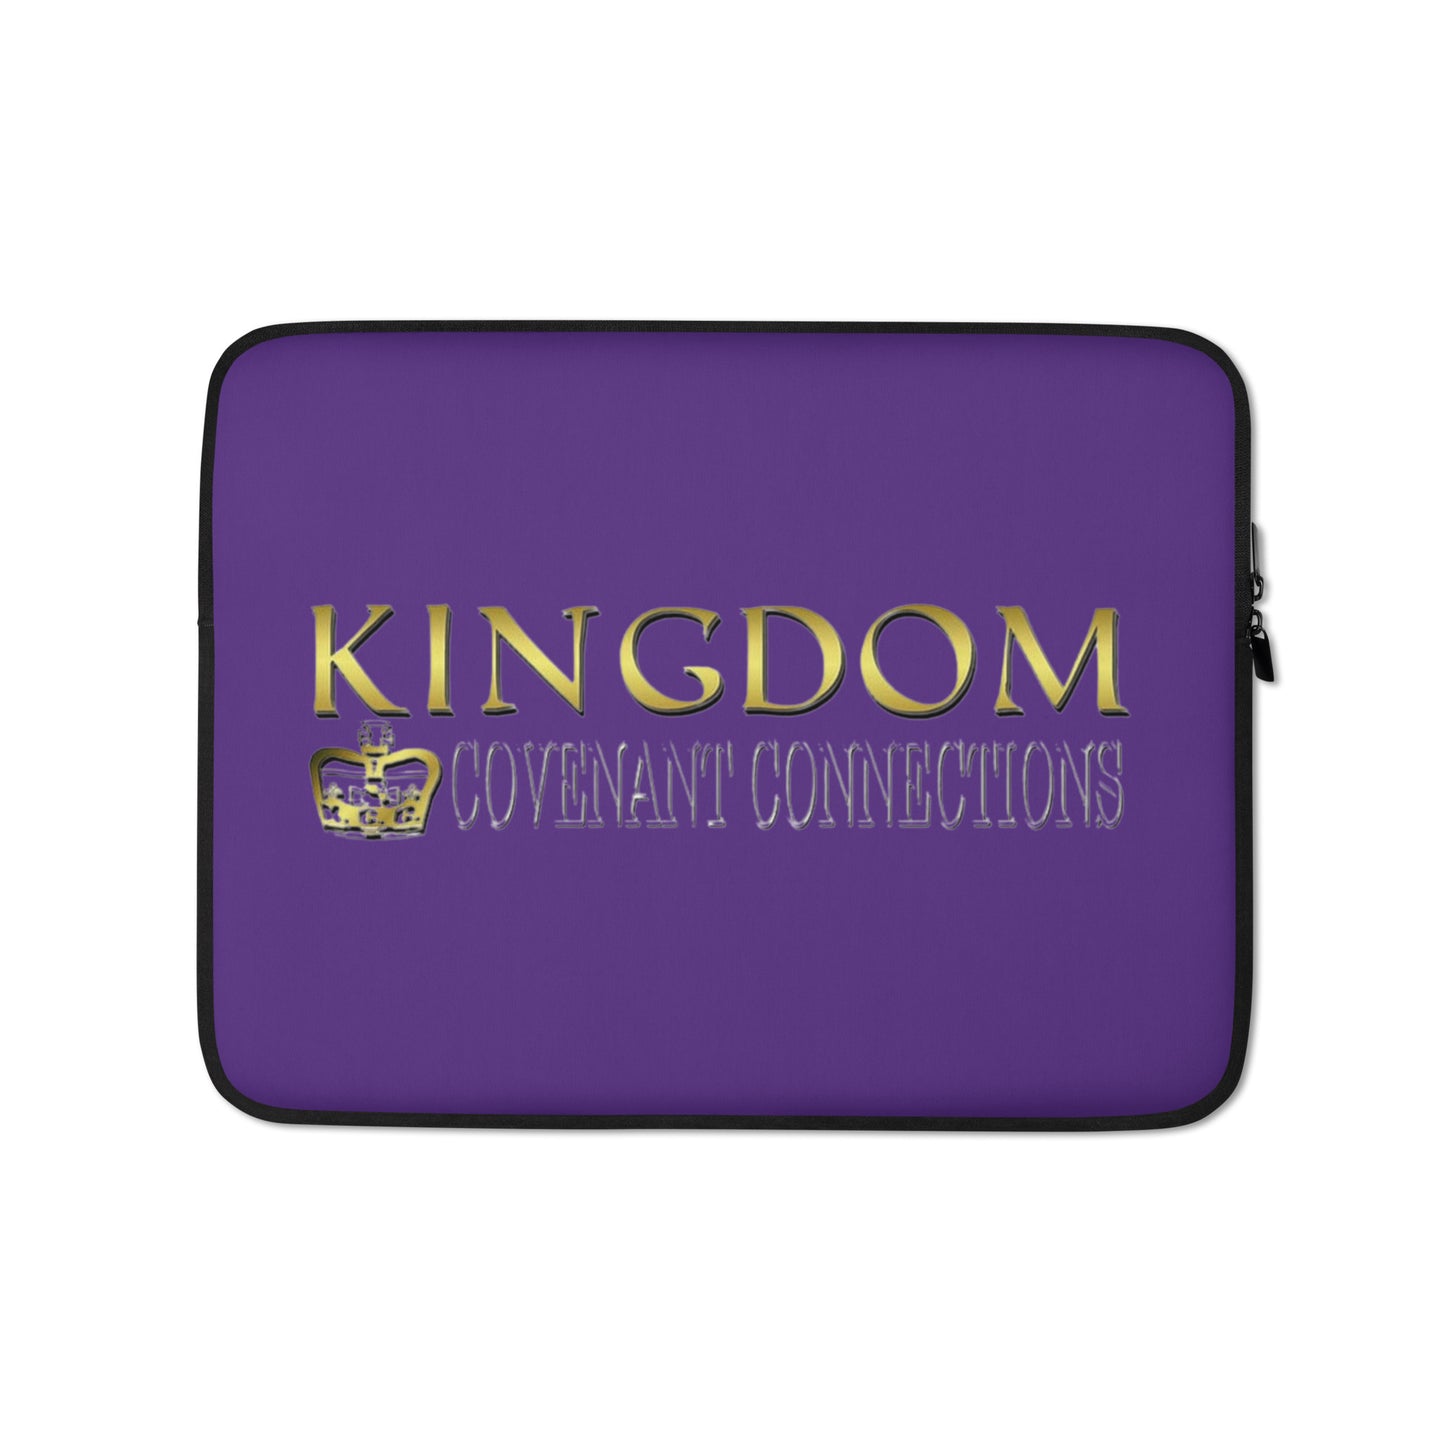 Kingdom Covenant Connections Laptop Sleeve